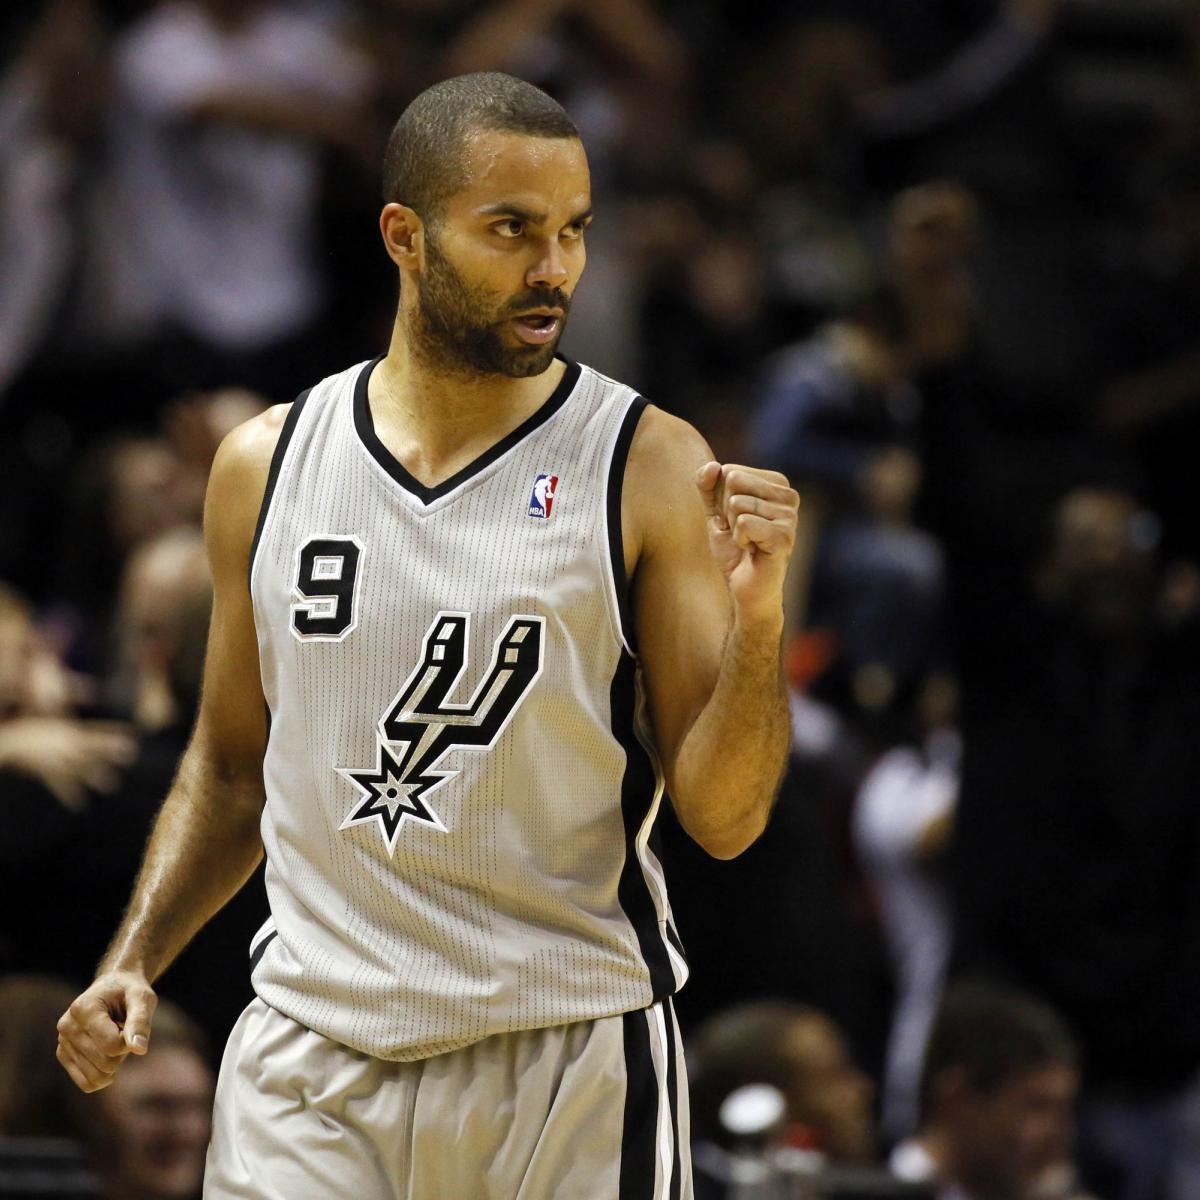 Tony Parker's jersey #9 to be retired by France - Eurohoops